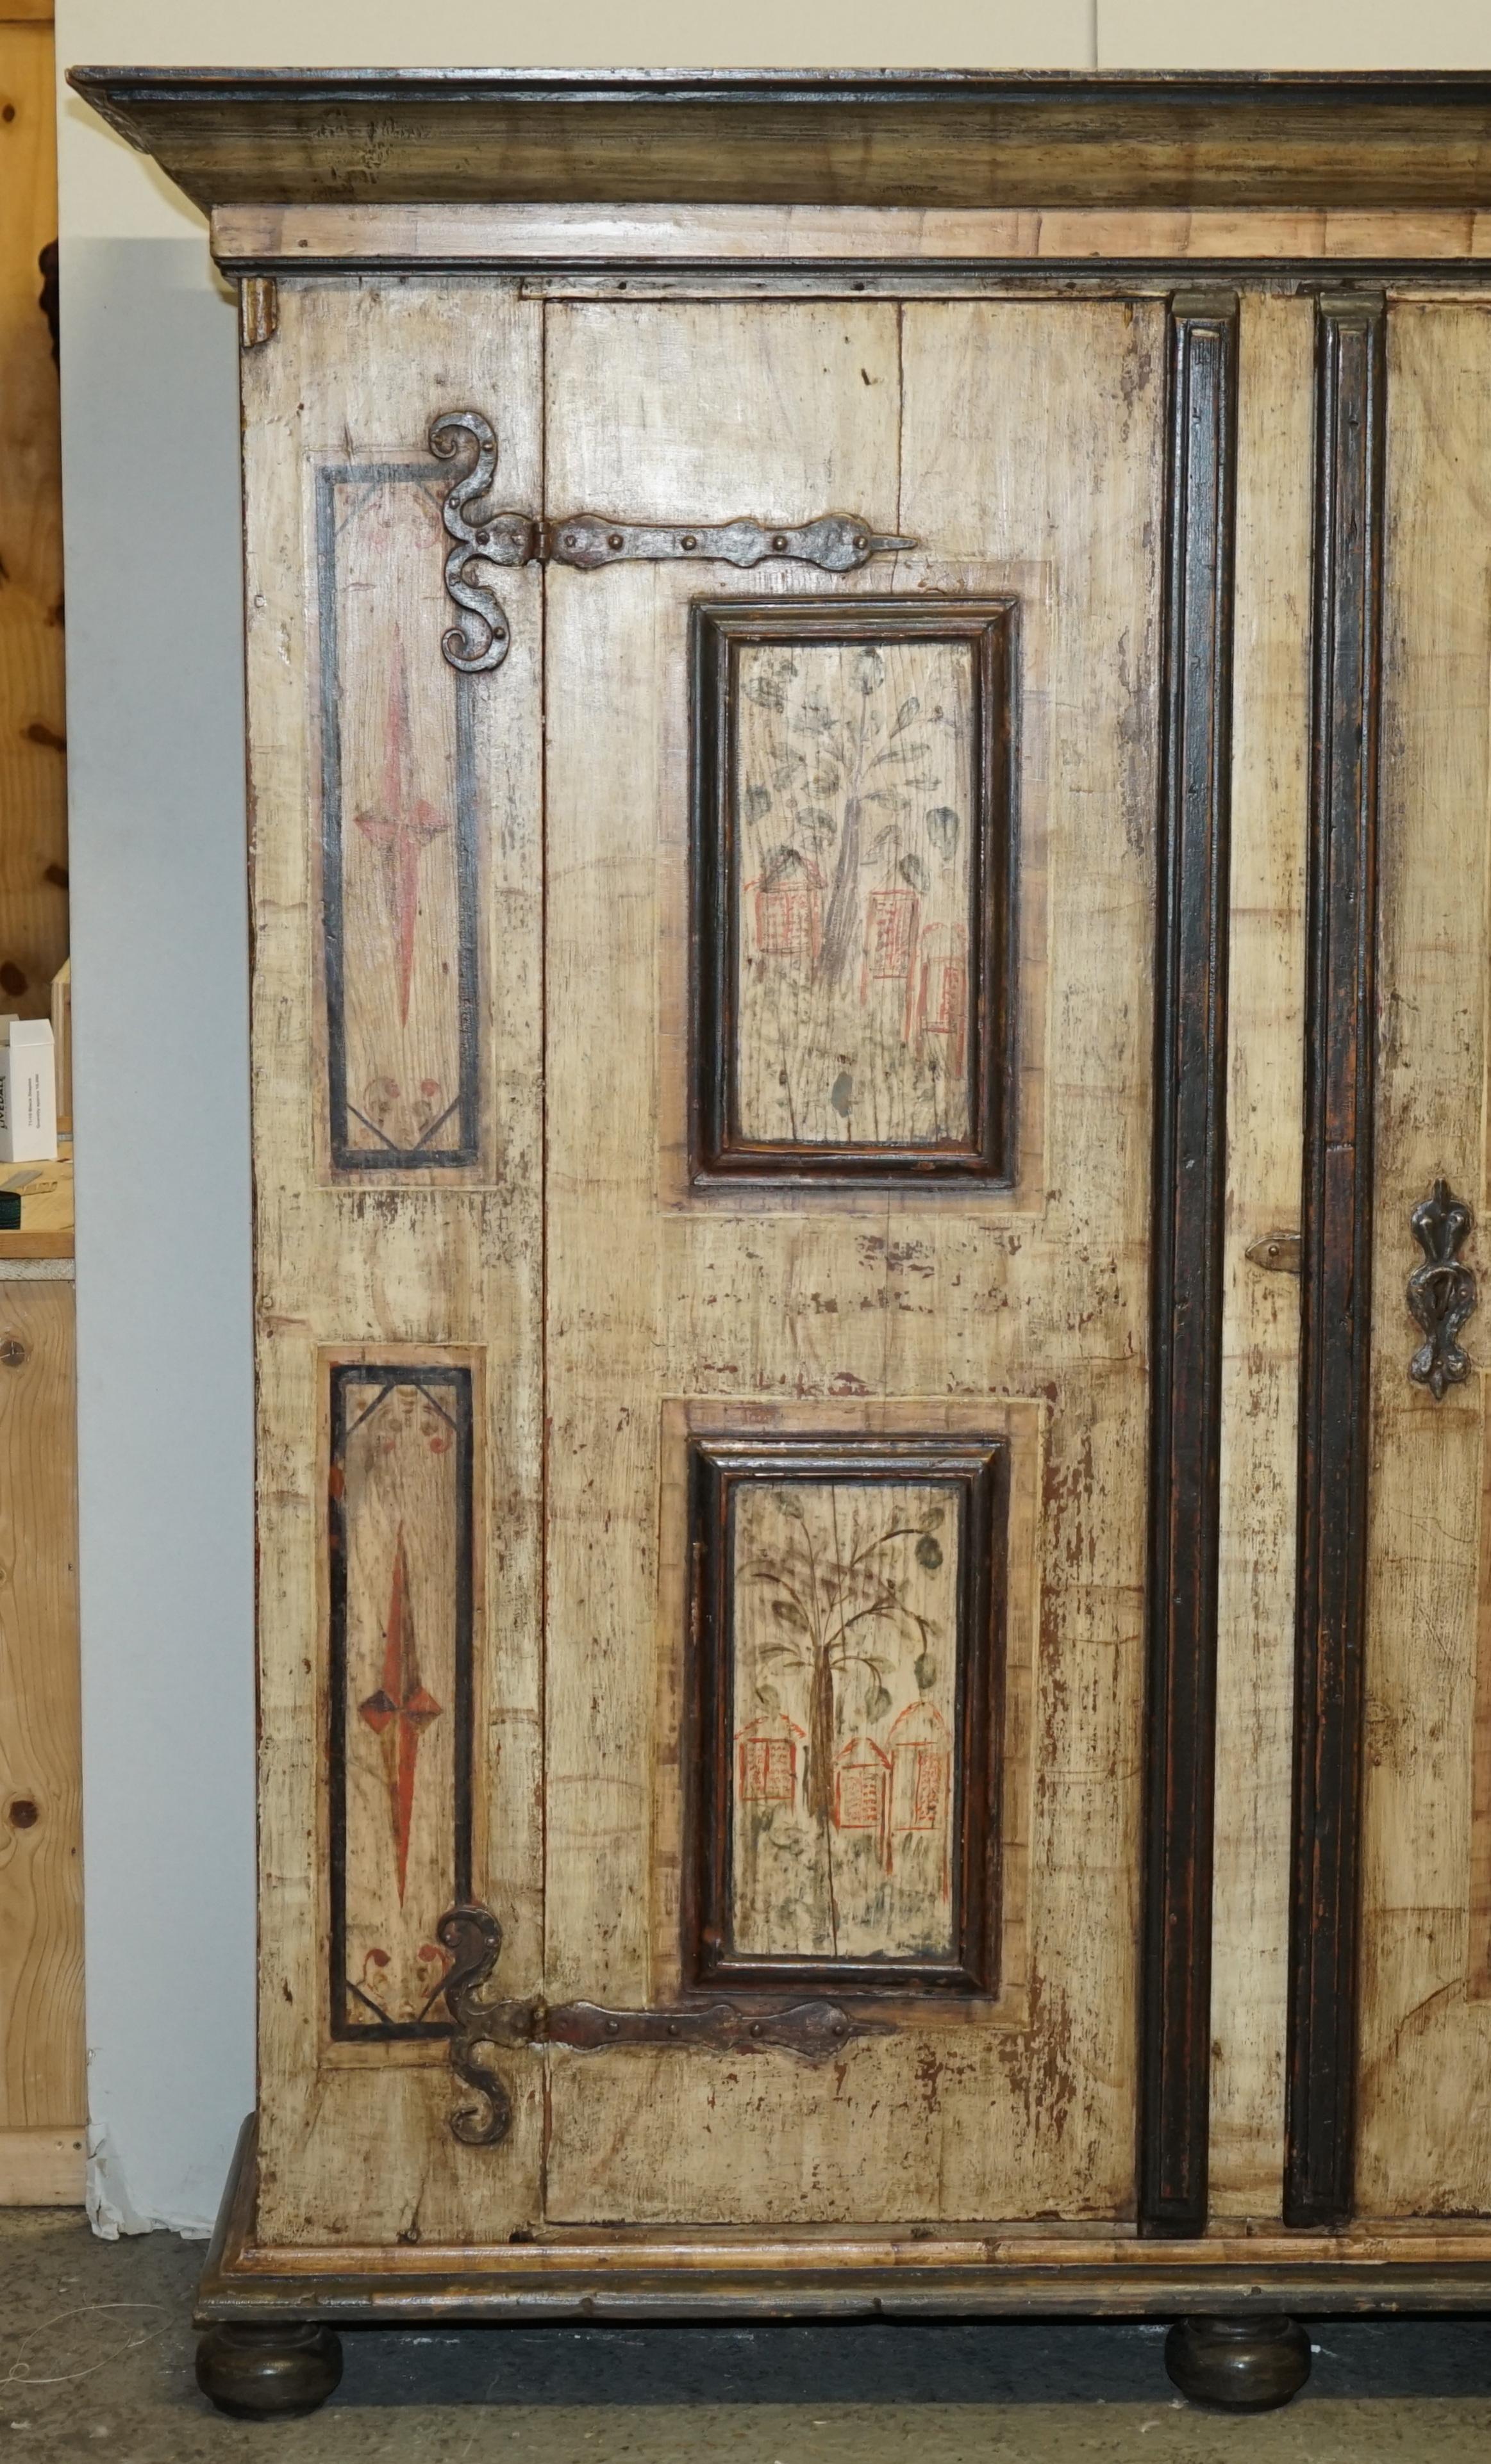 Royal House Antiques

The House Antiques est ravi d'offrir à la vente cette superbe, très grande original 1800 Antique German Marriage wardrobe / housekeepers folded linen cupboard with super are original Tree of Life paintings and baroque